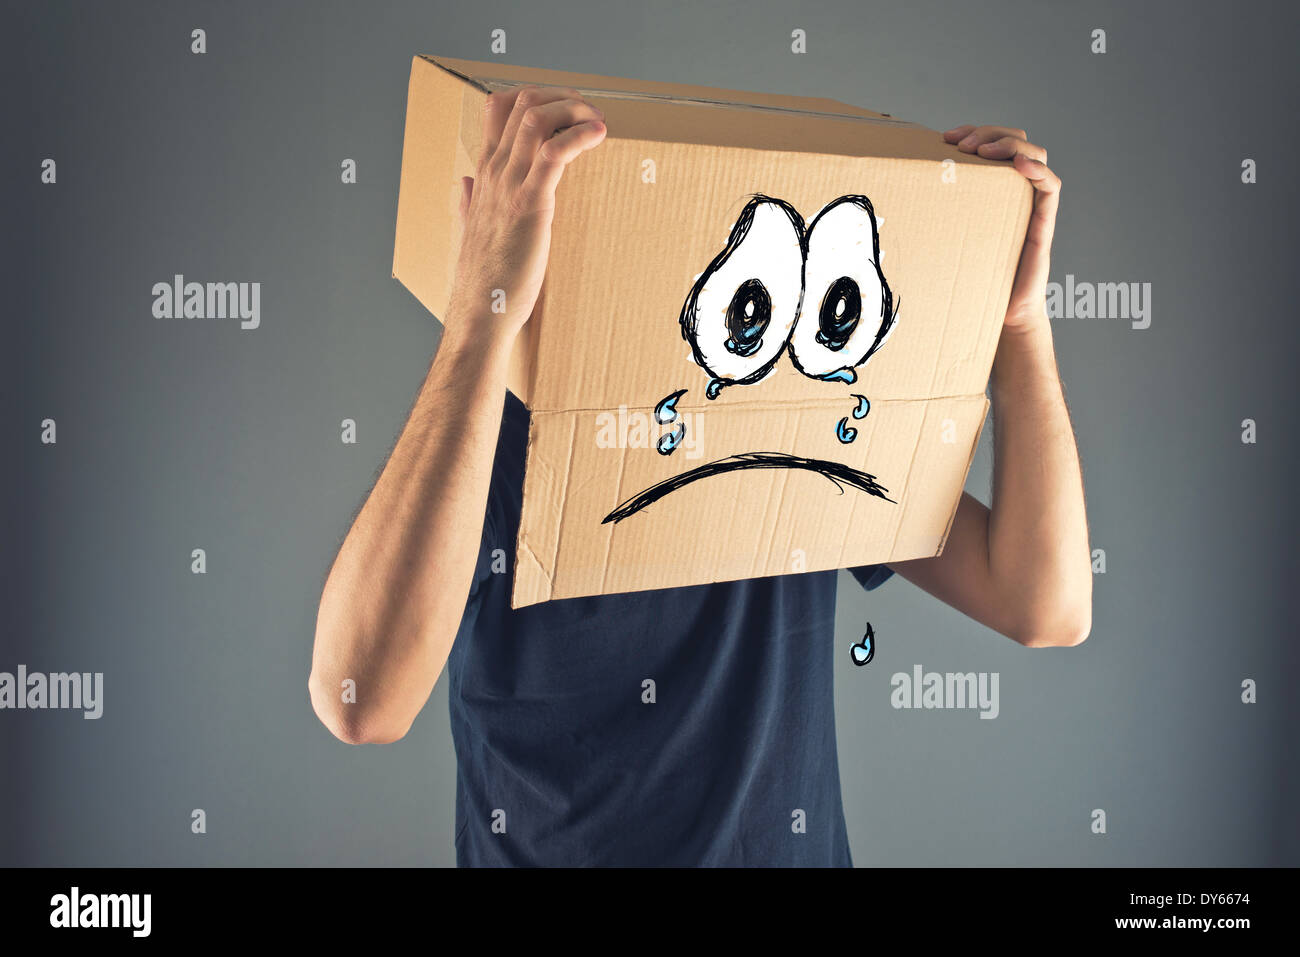 Man with cardboard box on his head and sad crying face expression. Concept of sadness and depression. Stock Photo